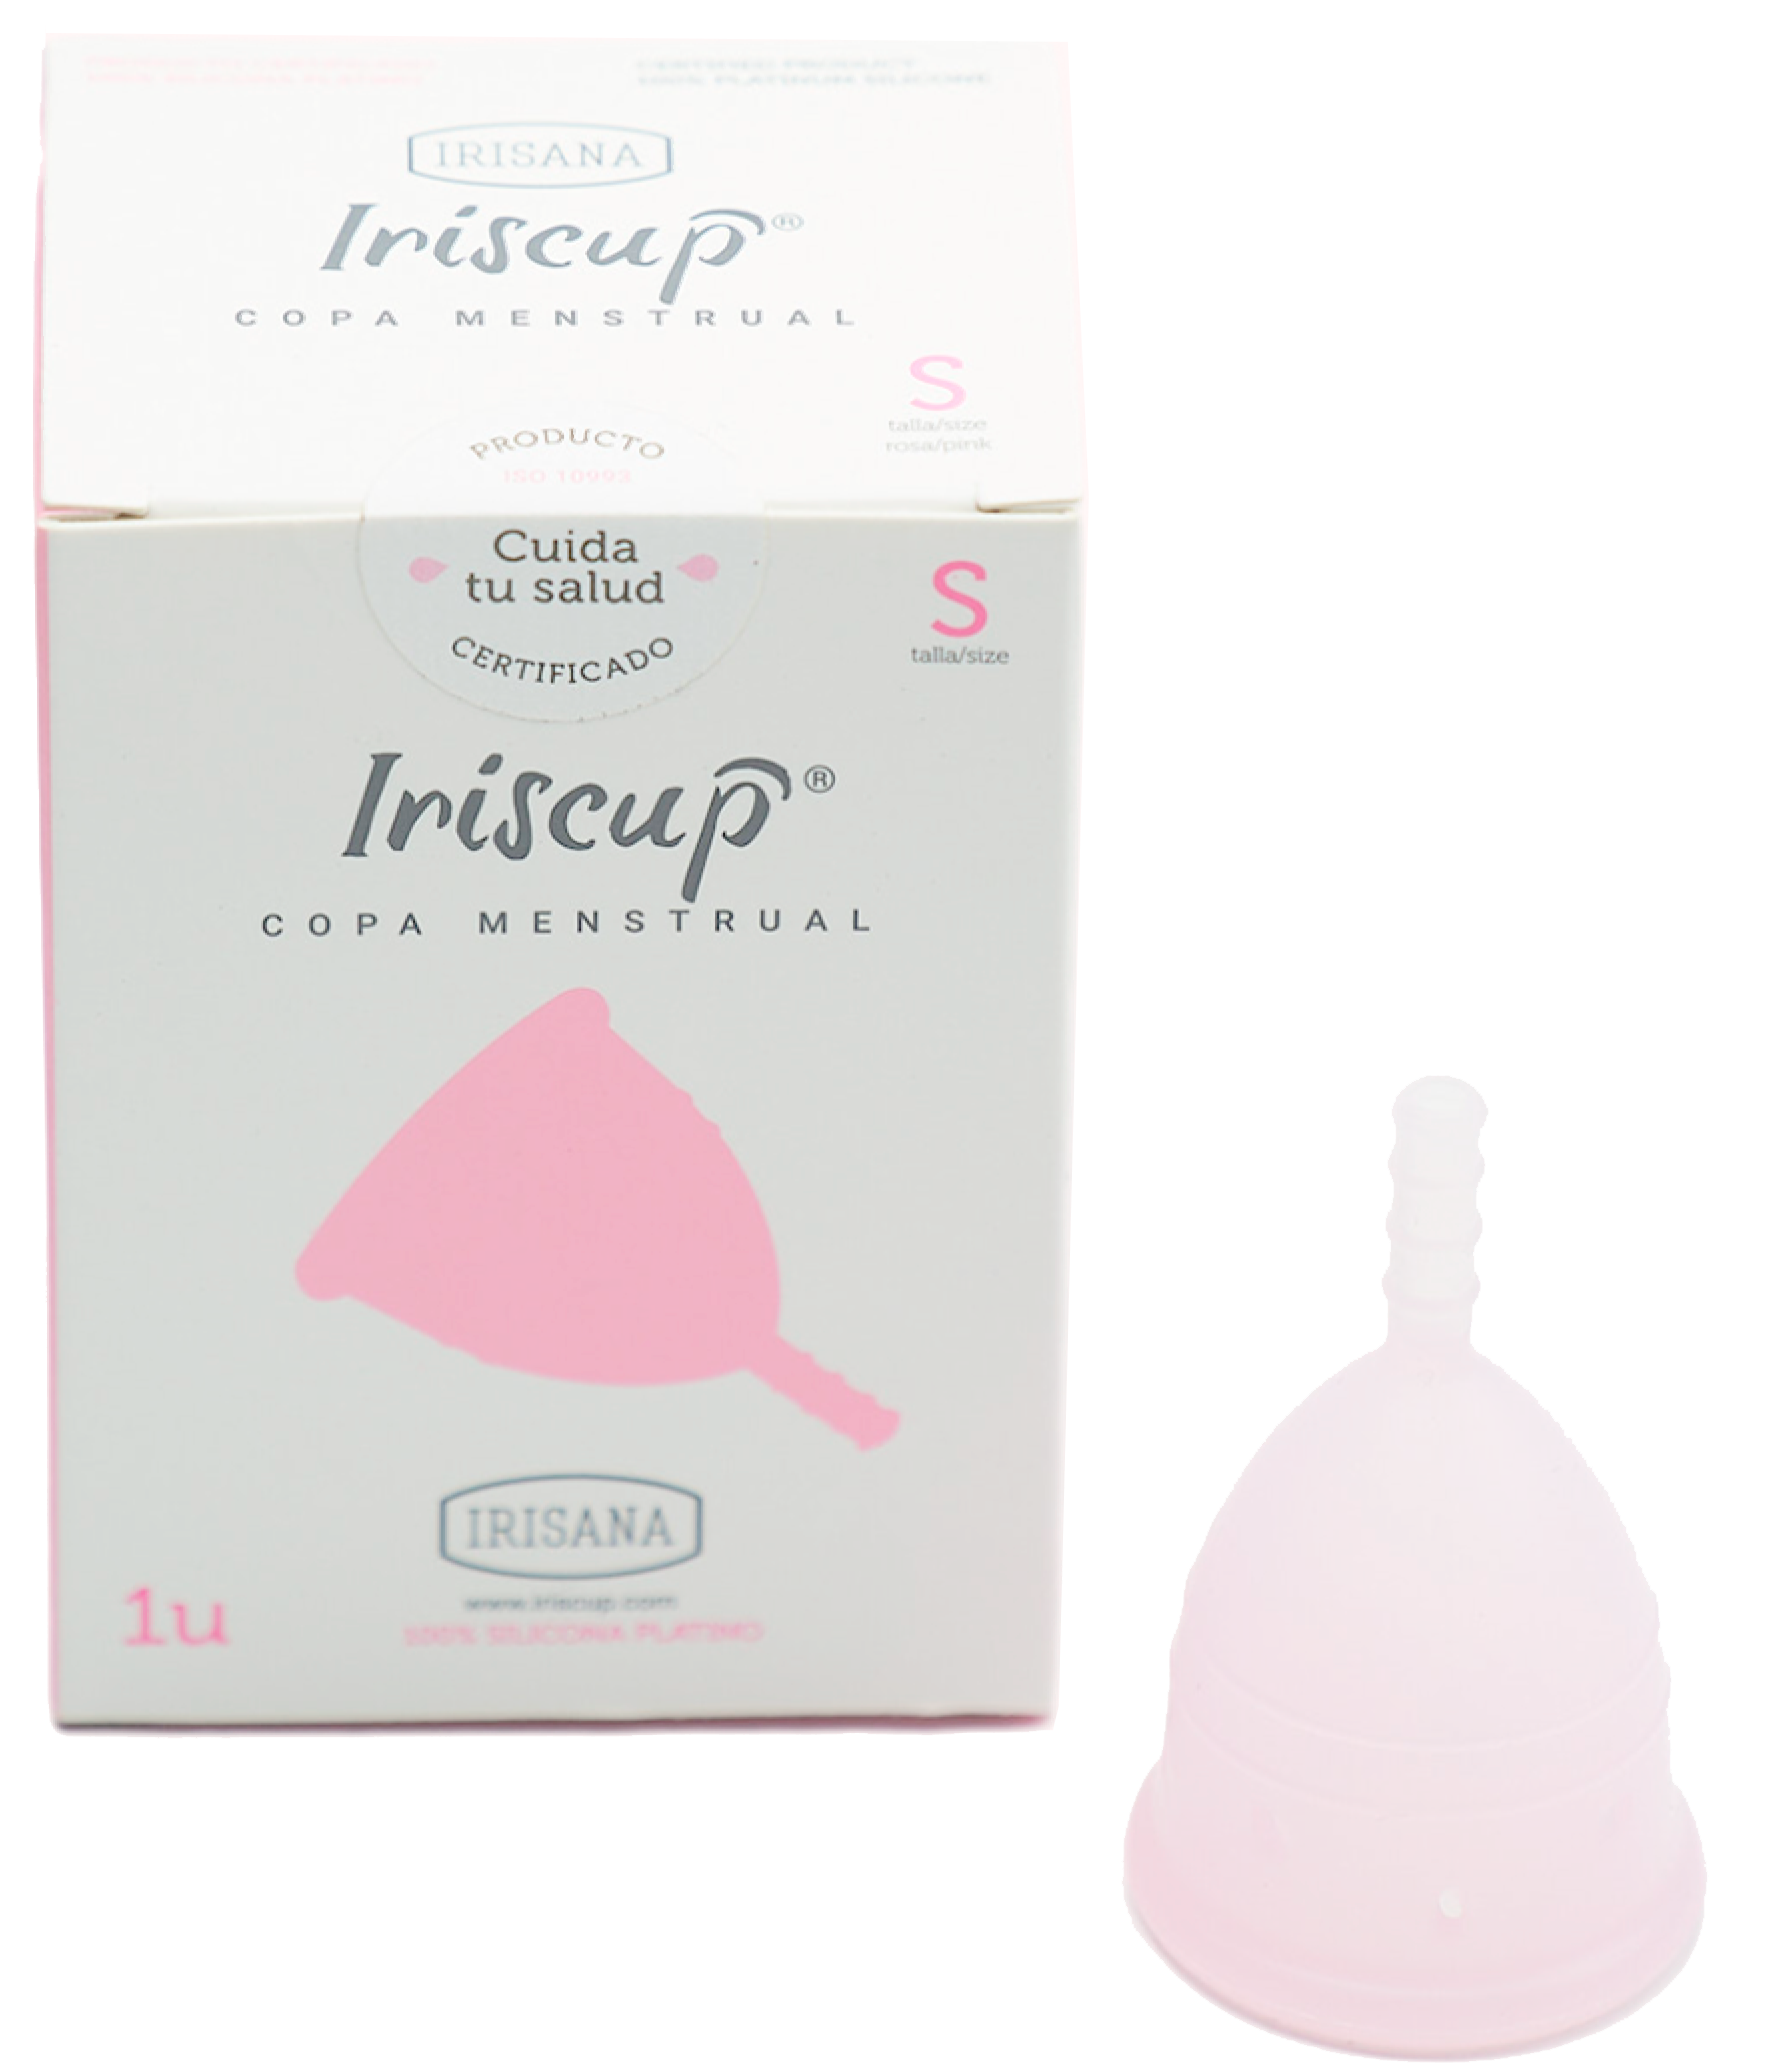 Iriscup menstrual cup